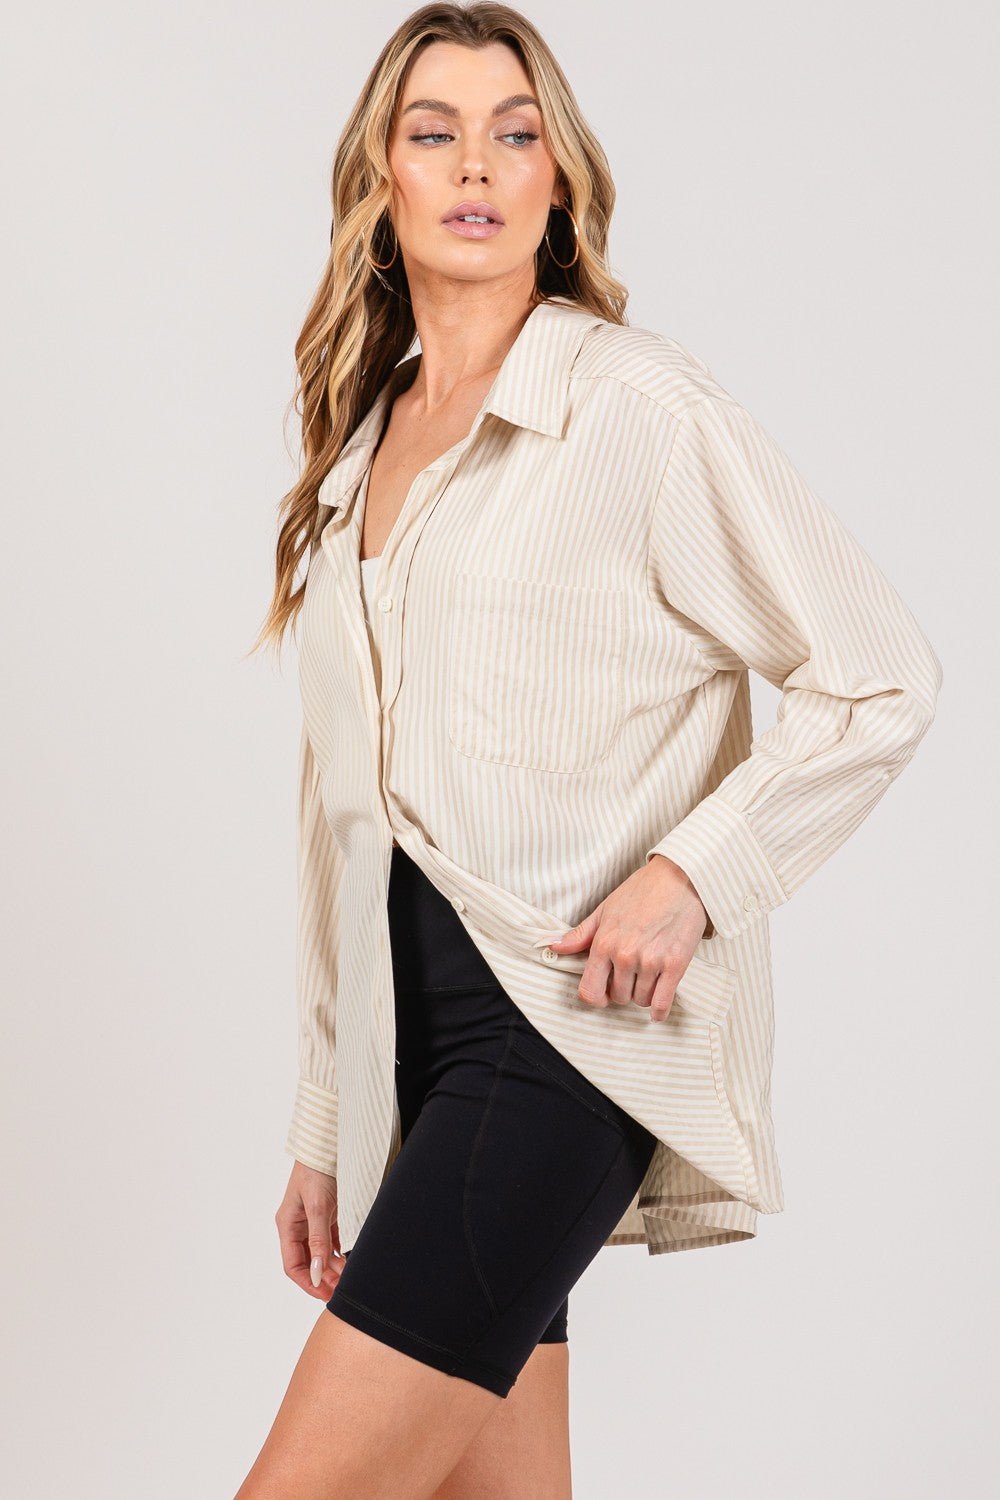 Striped Button Up Long Sleeve Shirt in TaupeShirtSAGE+FIG